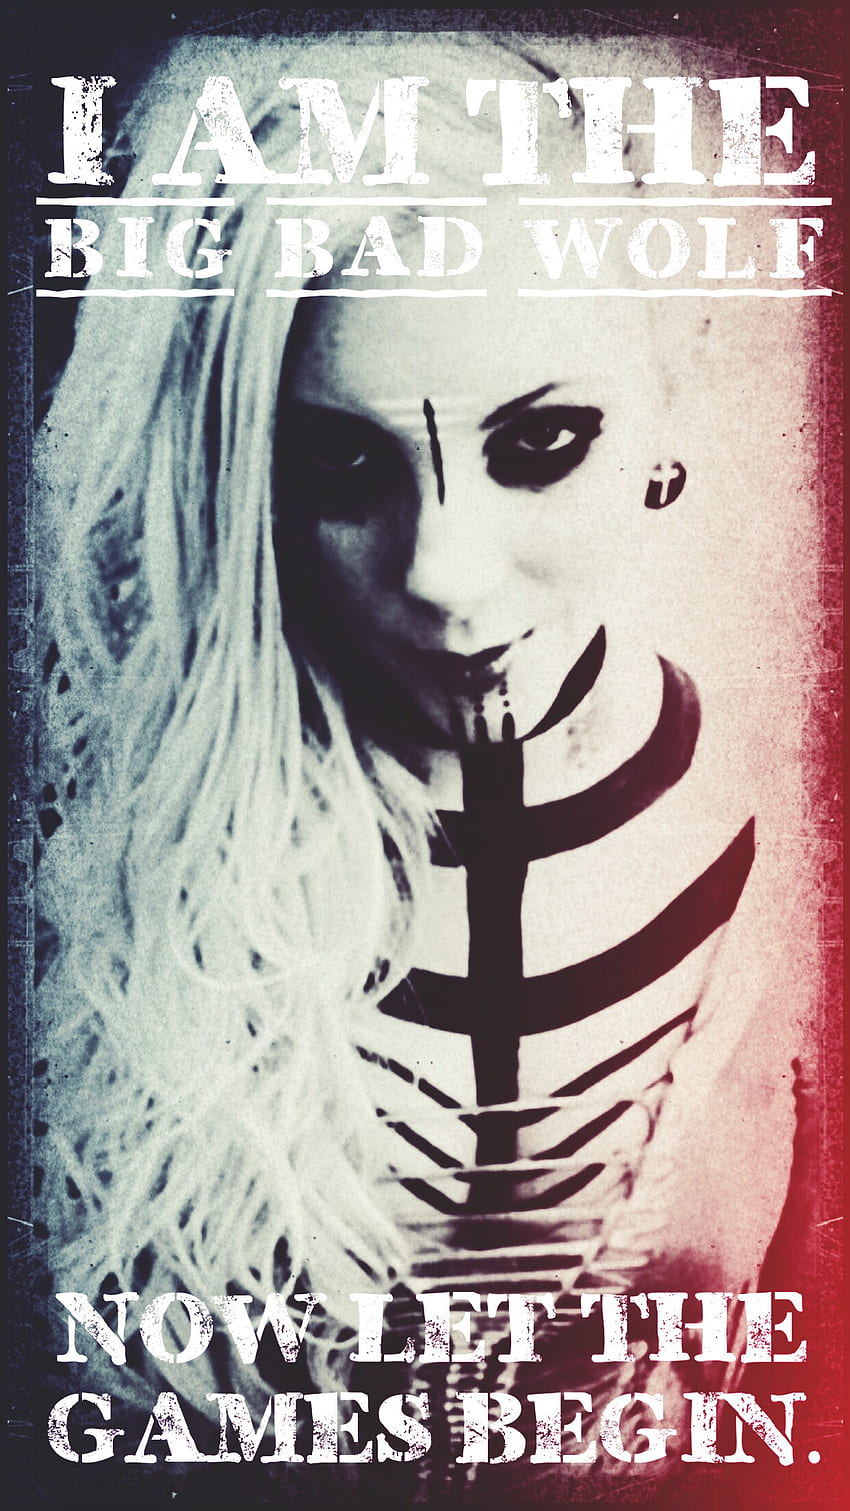 Big Bad Wolf-- Maria Brink, In This Moment HD phone wallpaper